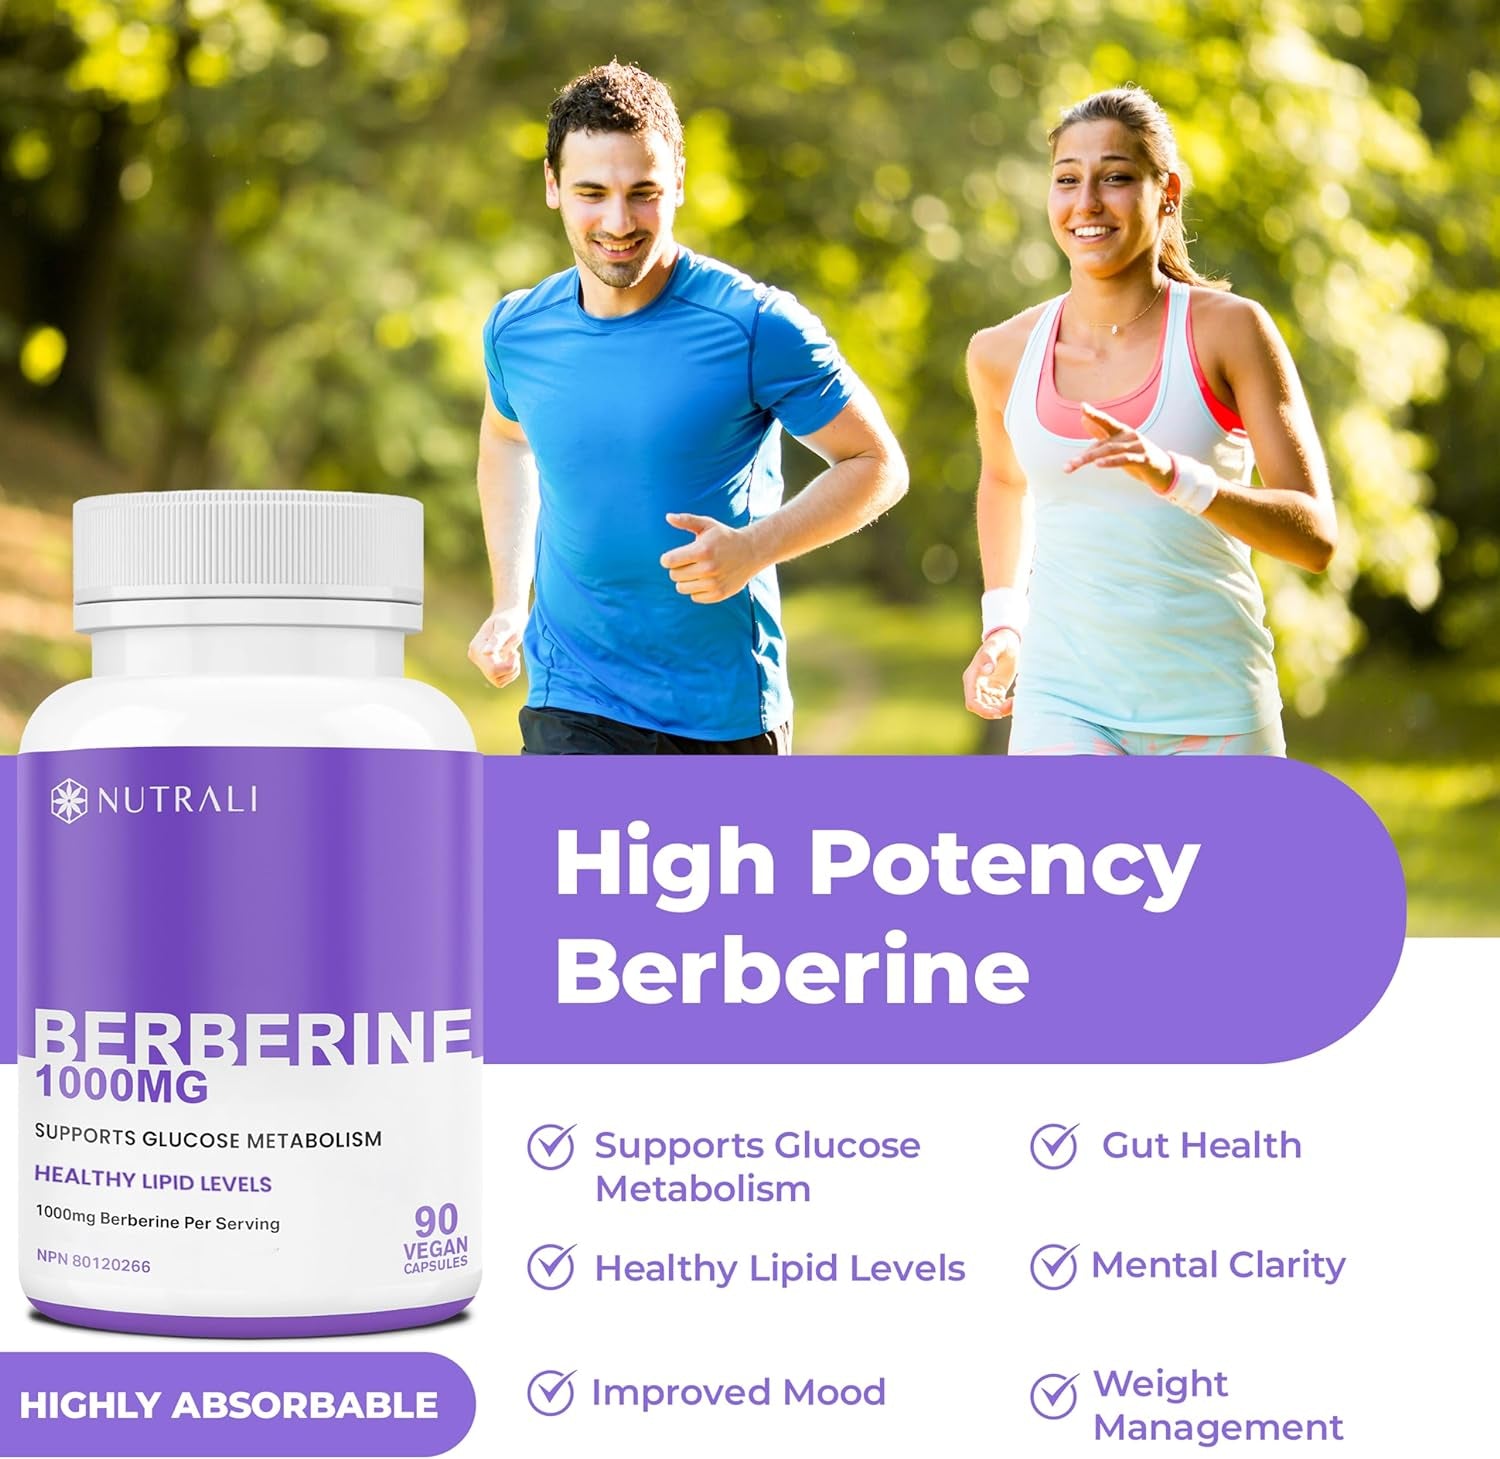 New Berberine MAXIMUM POTENCY 1000Mg per Serving (2 Capsules 500Mg Each) Supports Blood Sugar Levels, Healthy Lipid (Fat) and Glucose Metabolism. Non-Gmo, Vegan, Gluten Free. 90 Easy to Swallow Capsules